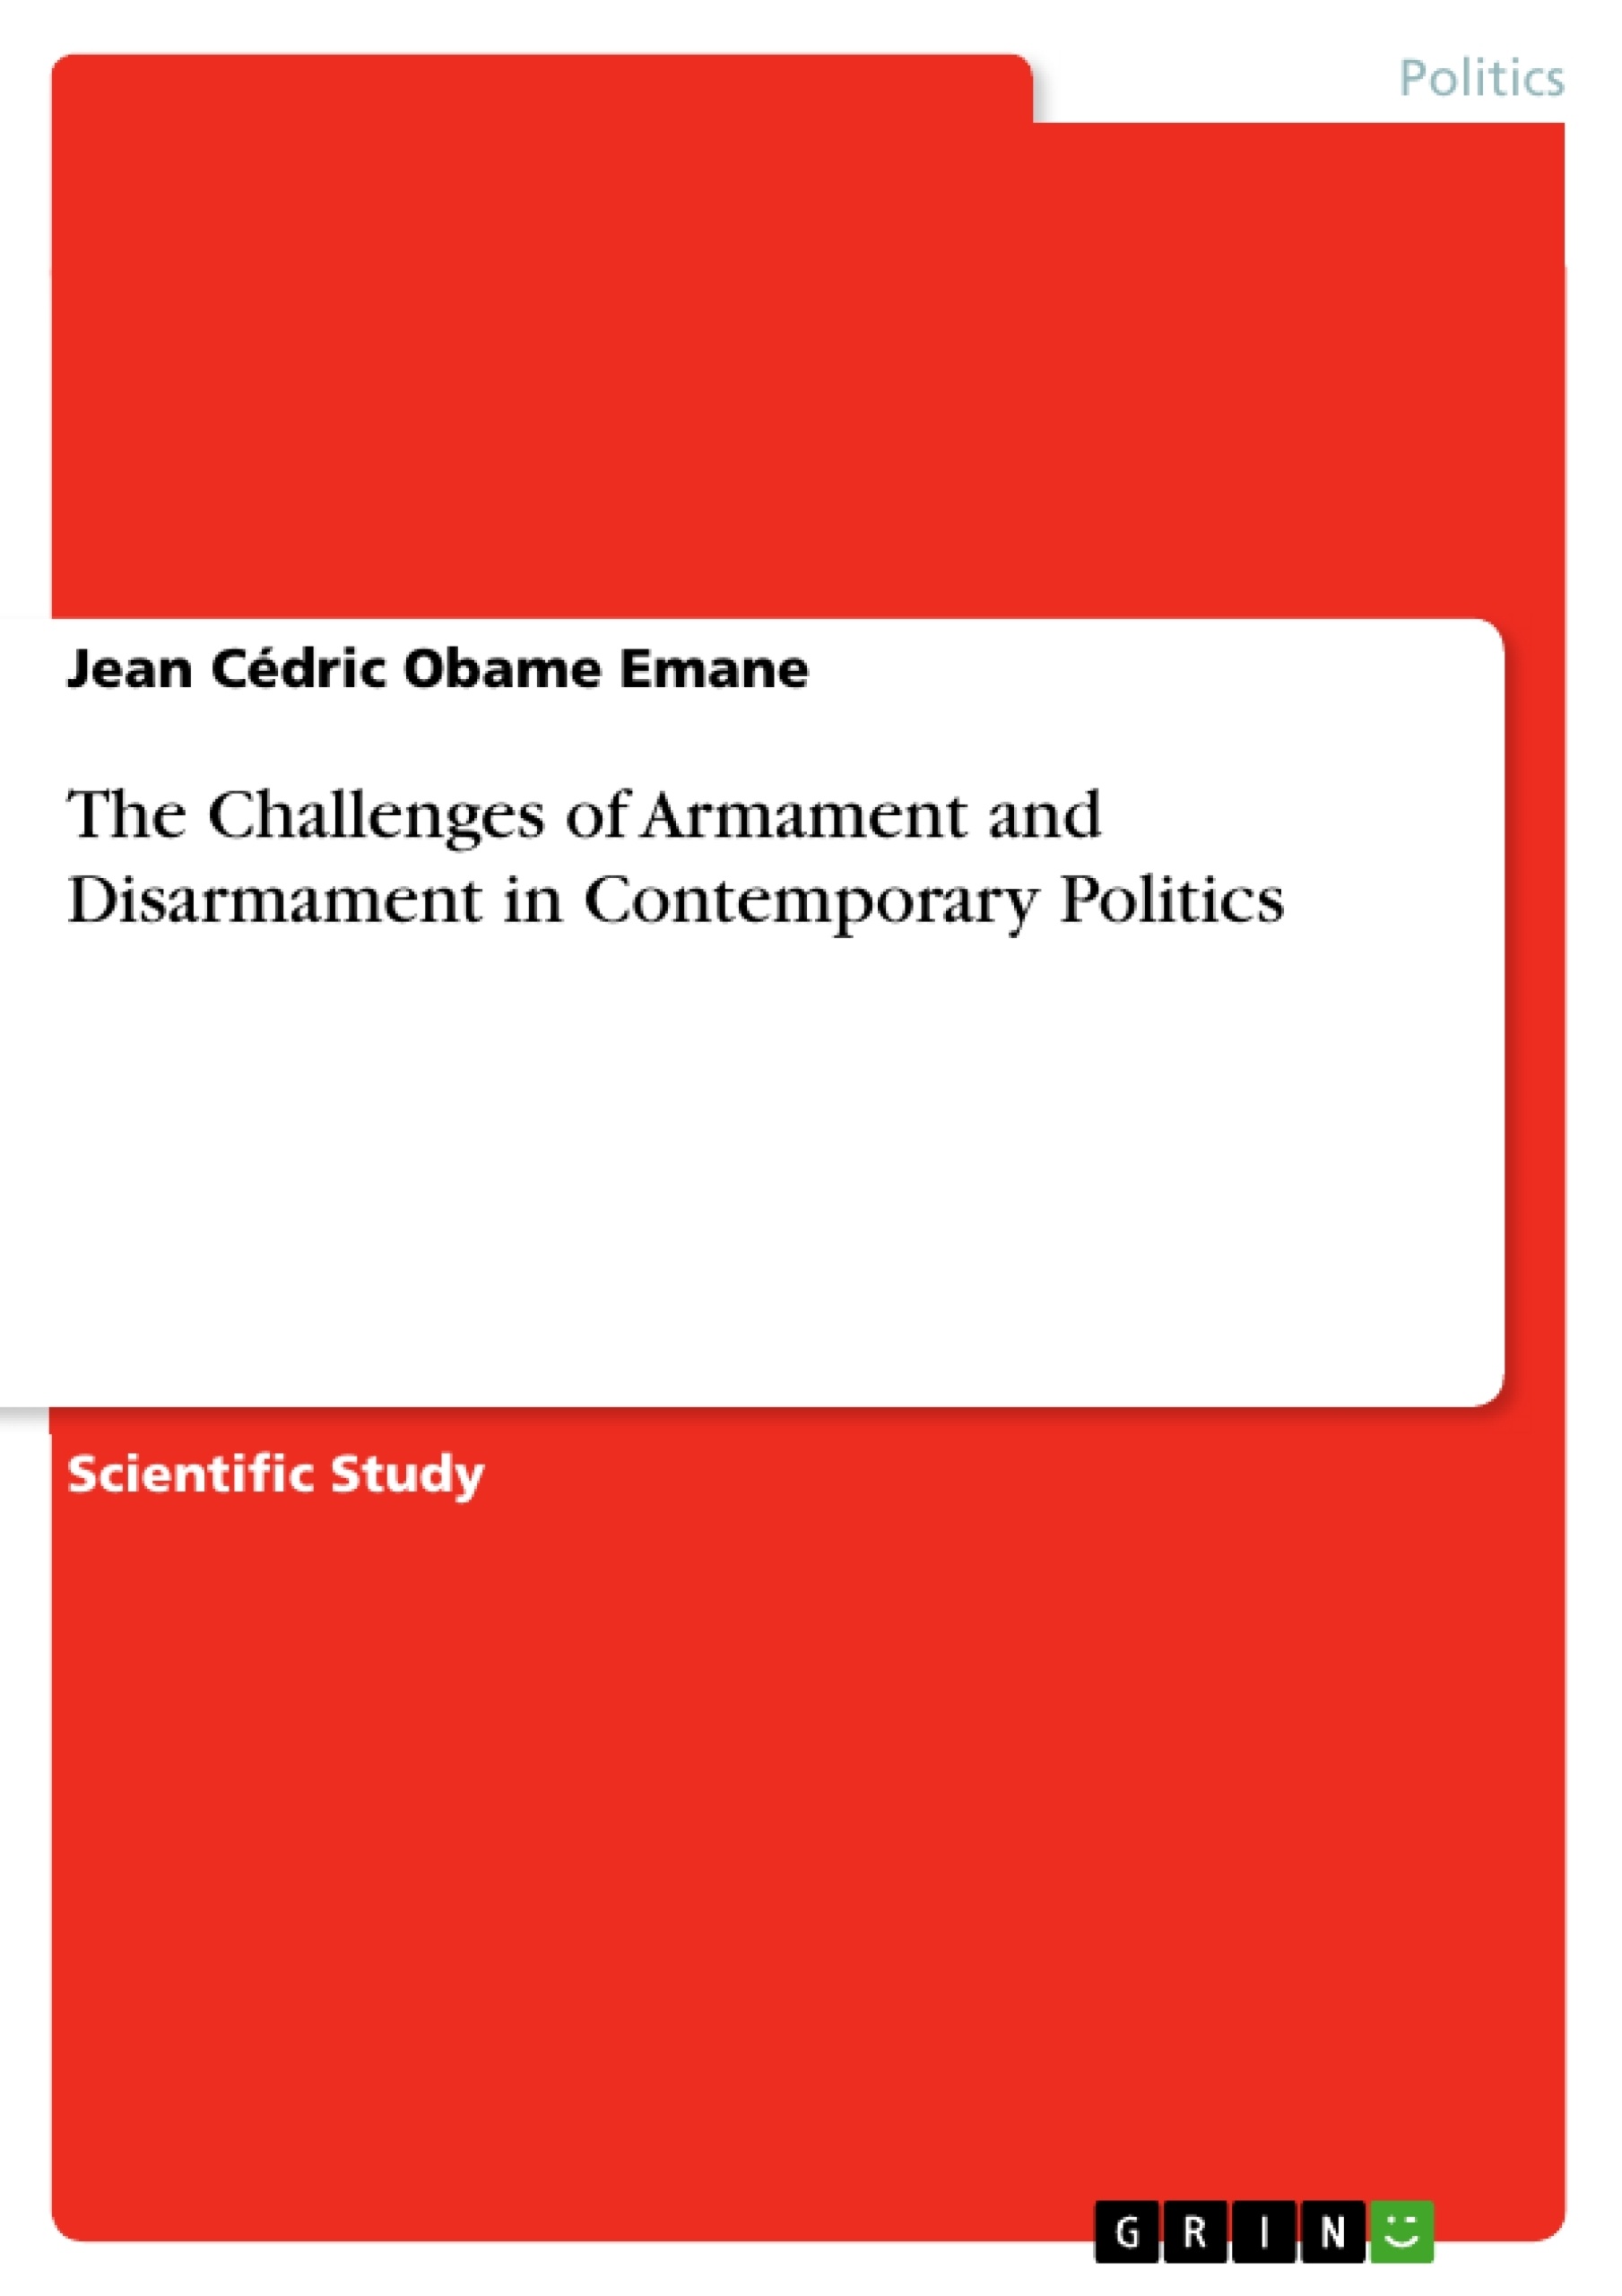 Título: The Challenges of Armament and Disarmament in Contemporary Politics